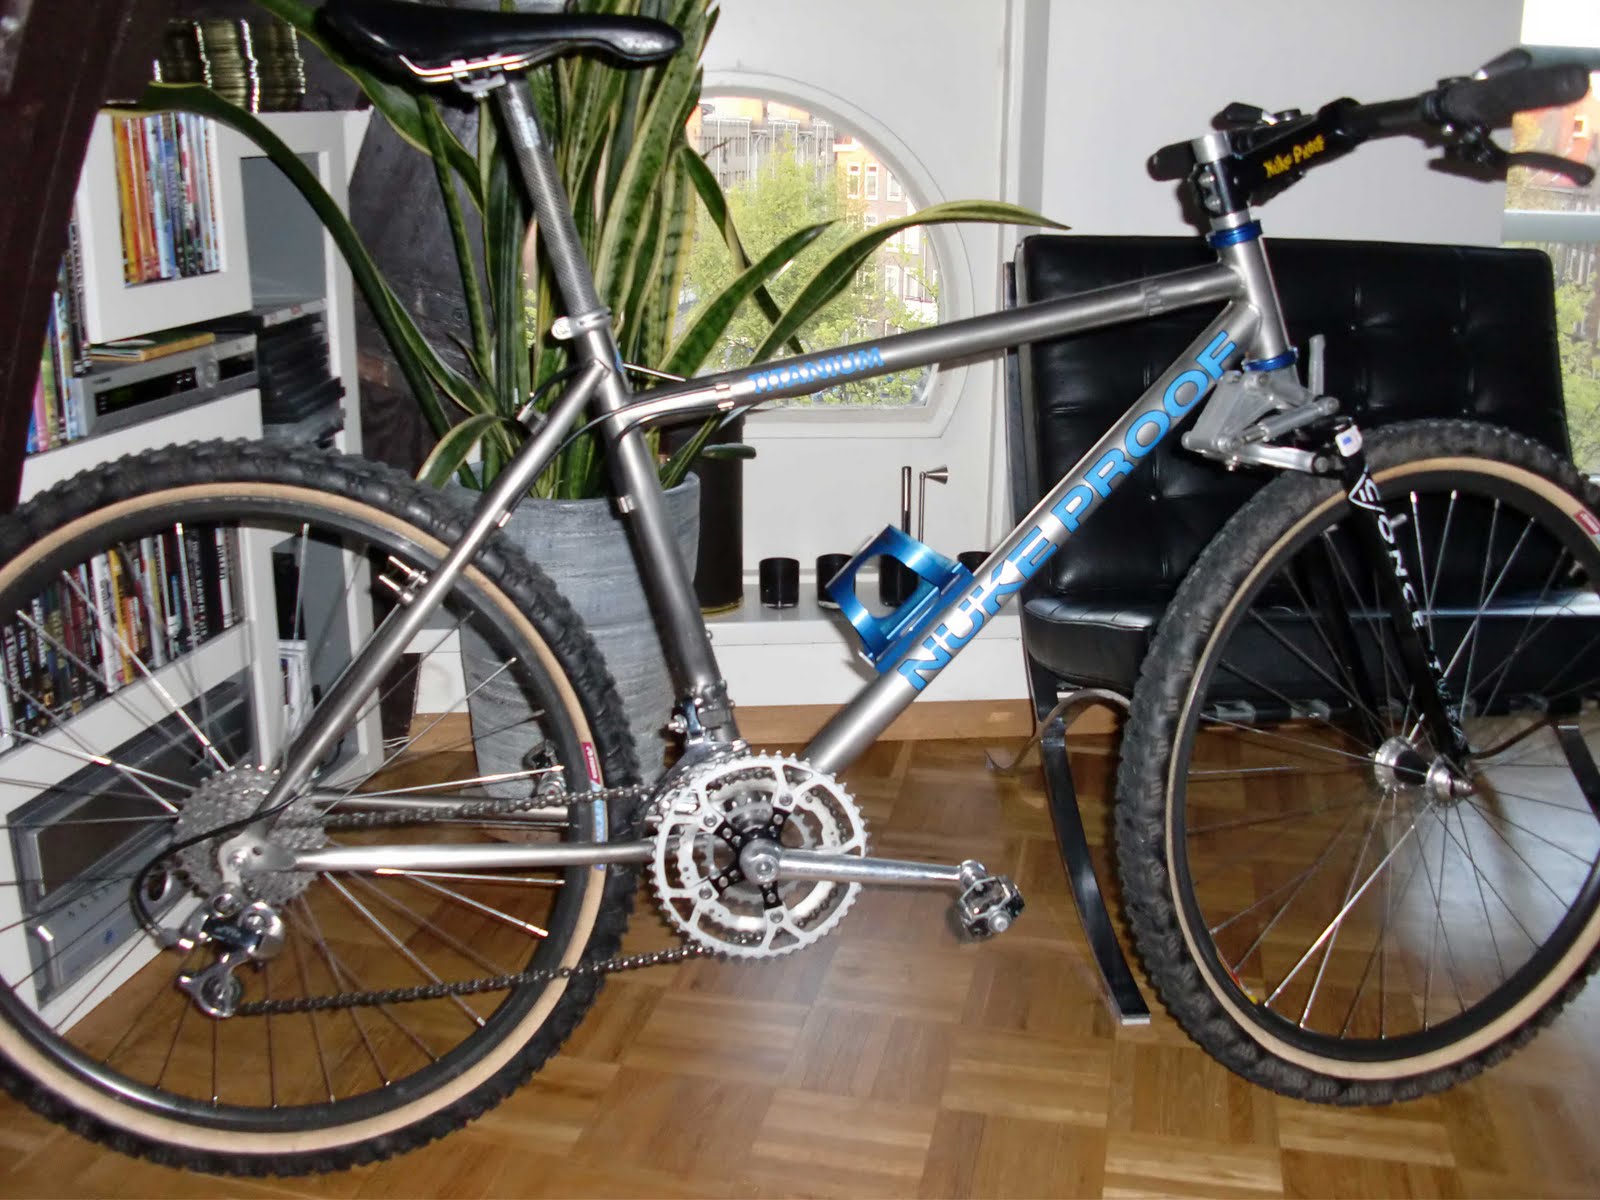 OLD METAL , my retro mountainbike blog: The AMP suspension fork